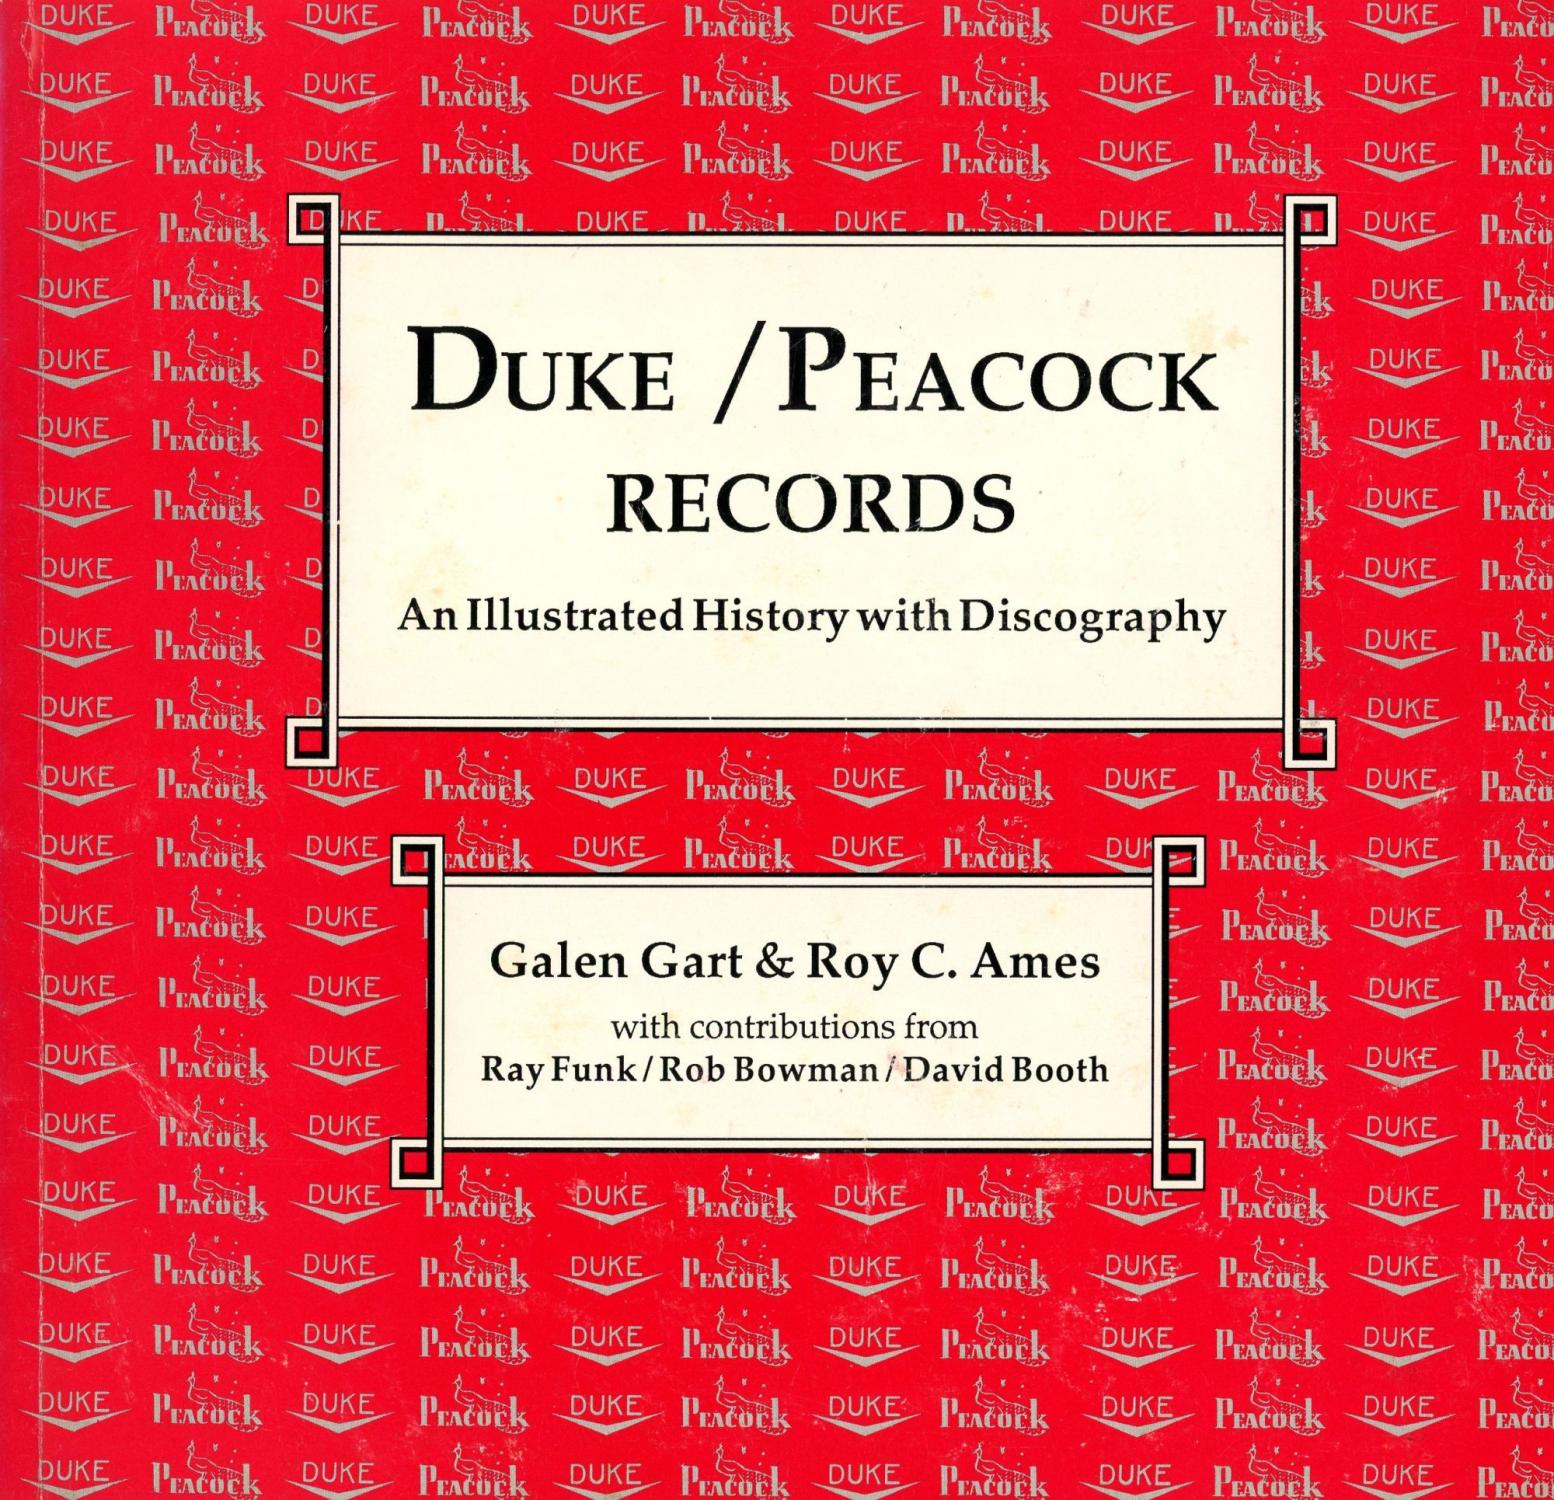 Duke/Peacock Records: An Illustrated History with Discography - GART, Galen and Roy C. Ames